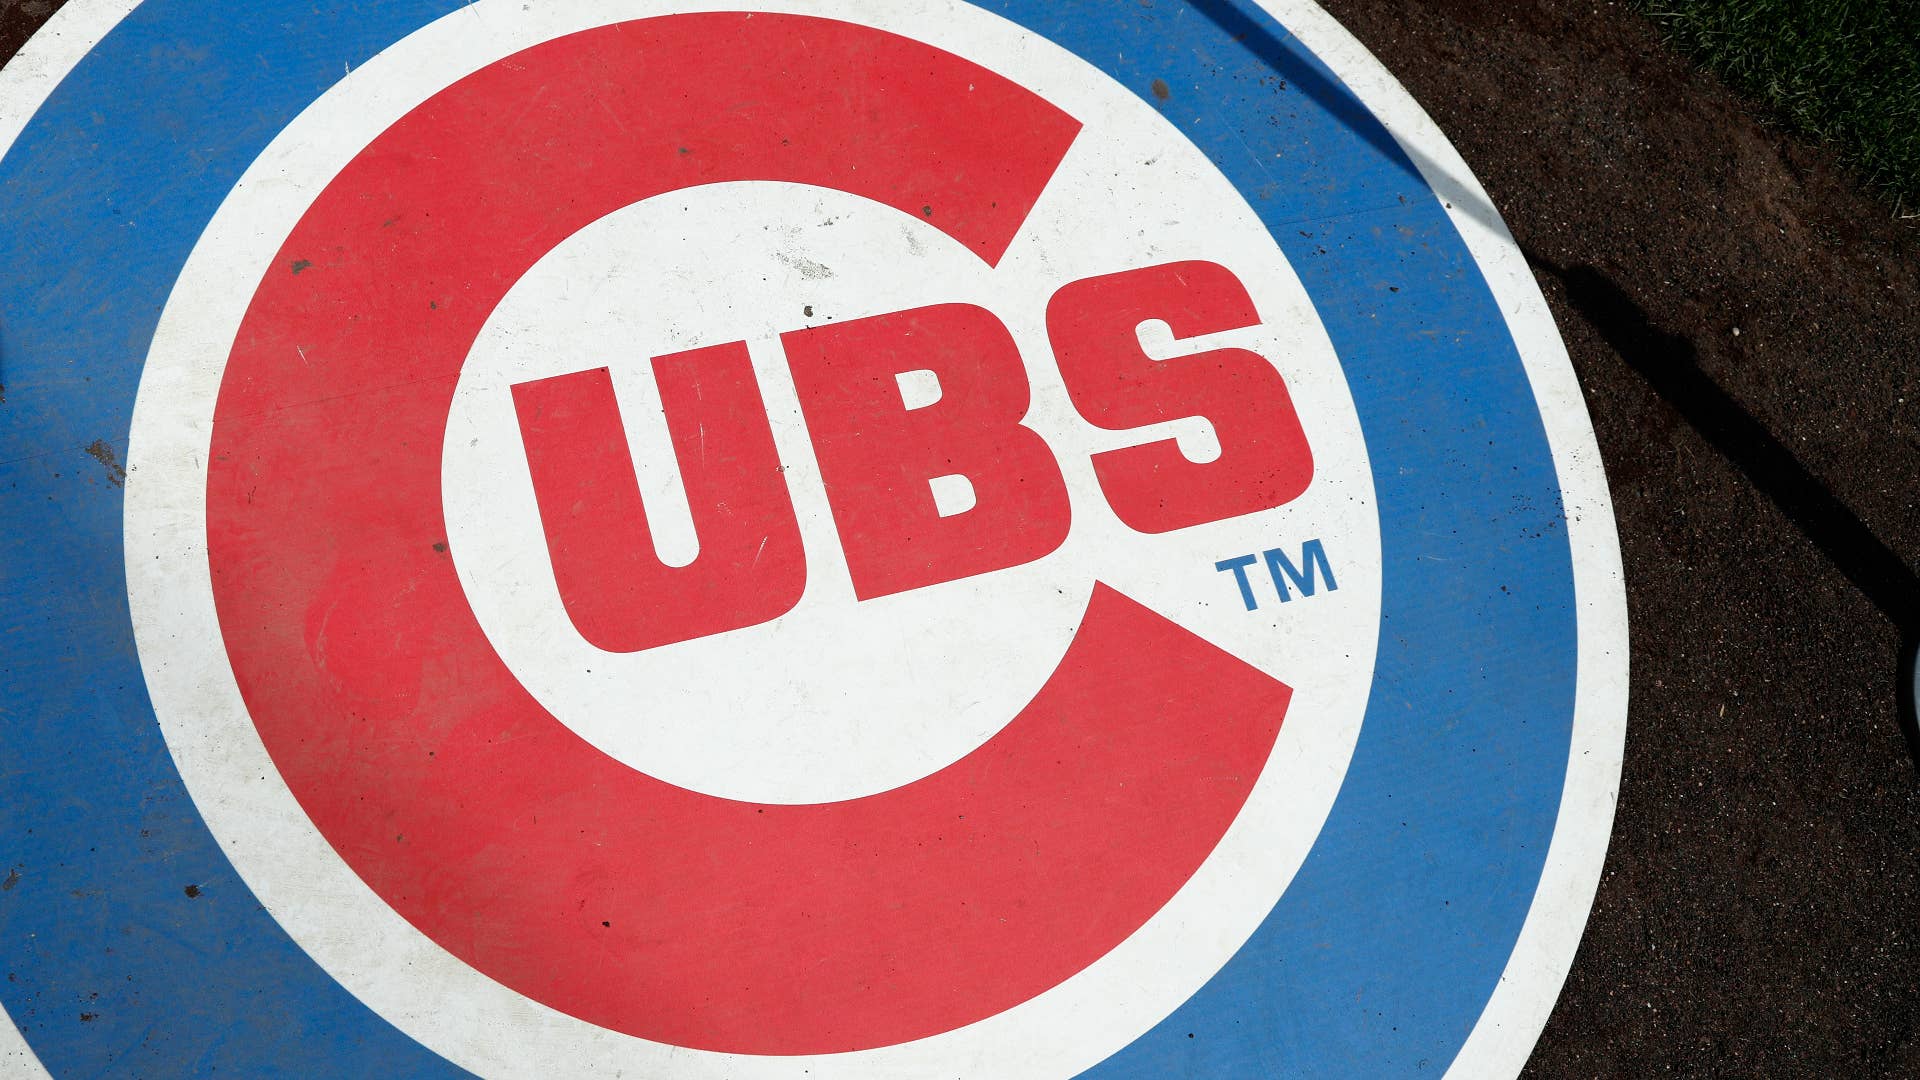 General view of the Chicago Cubs logo on the on deck circle.